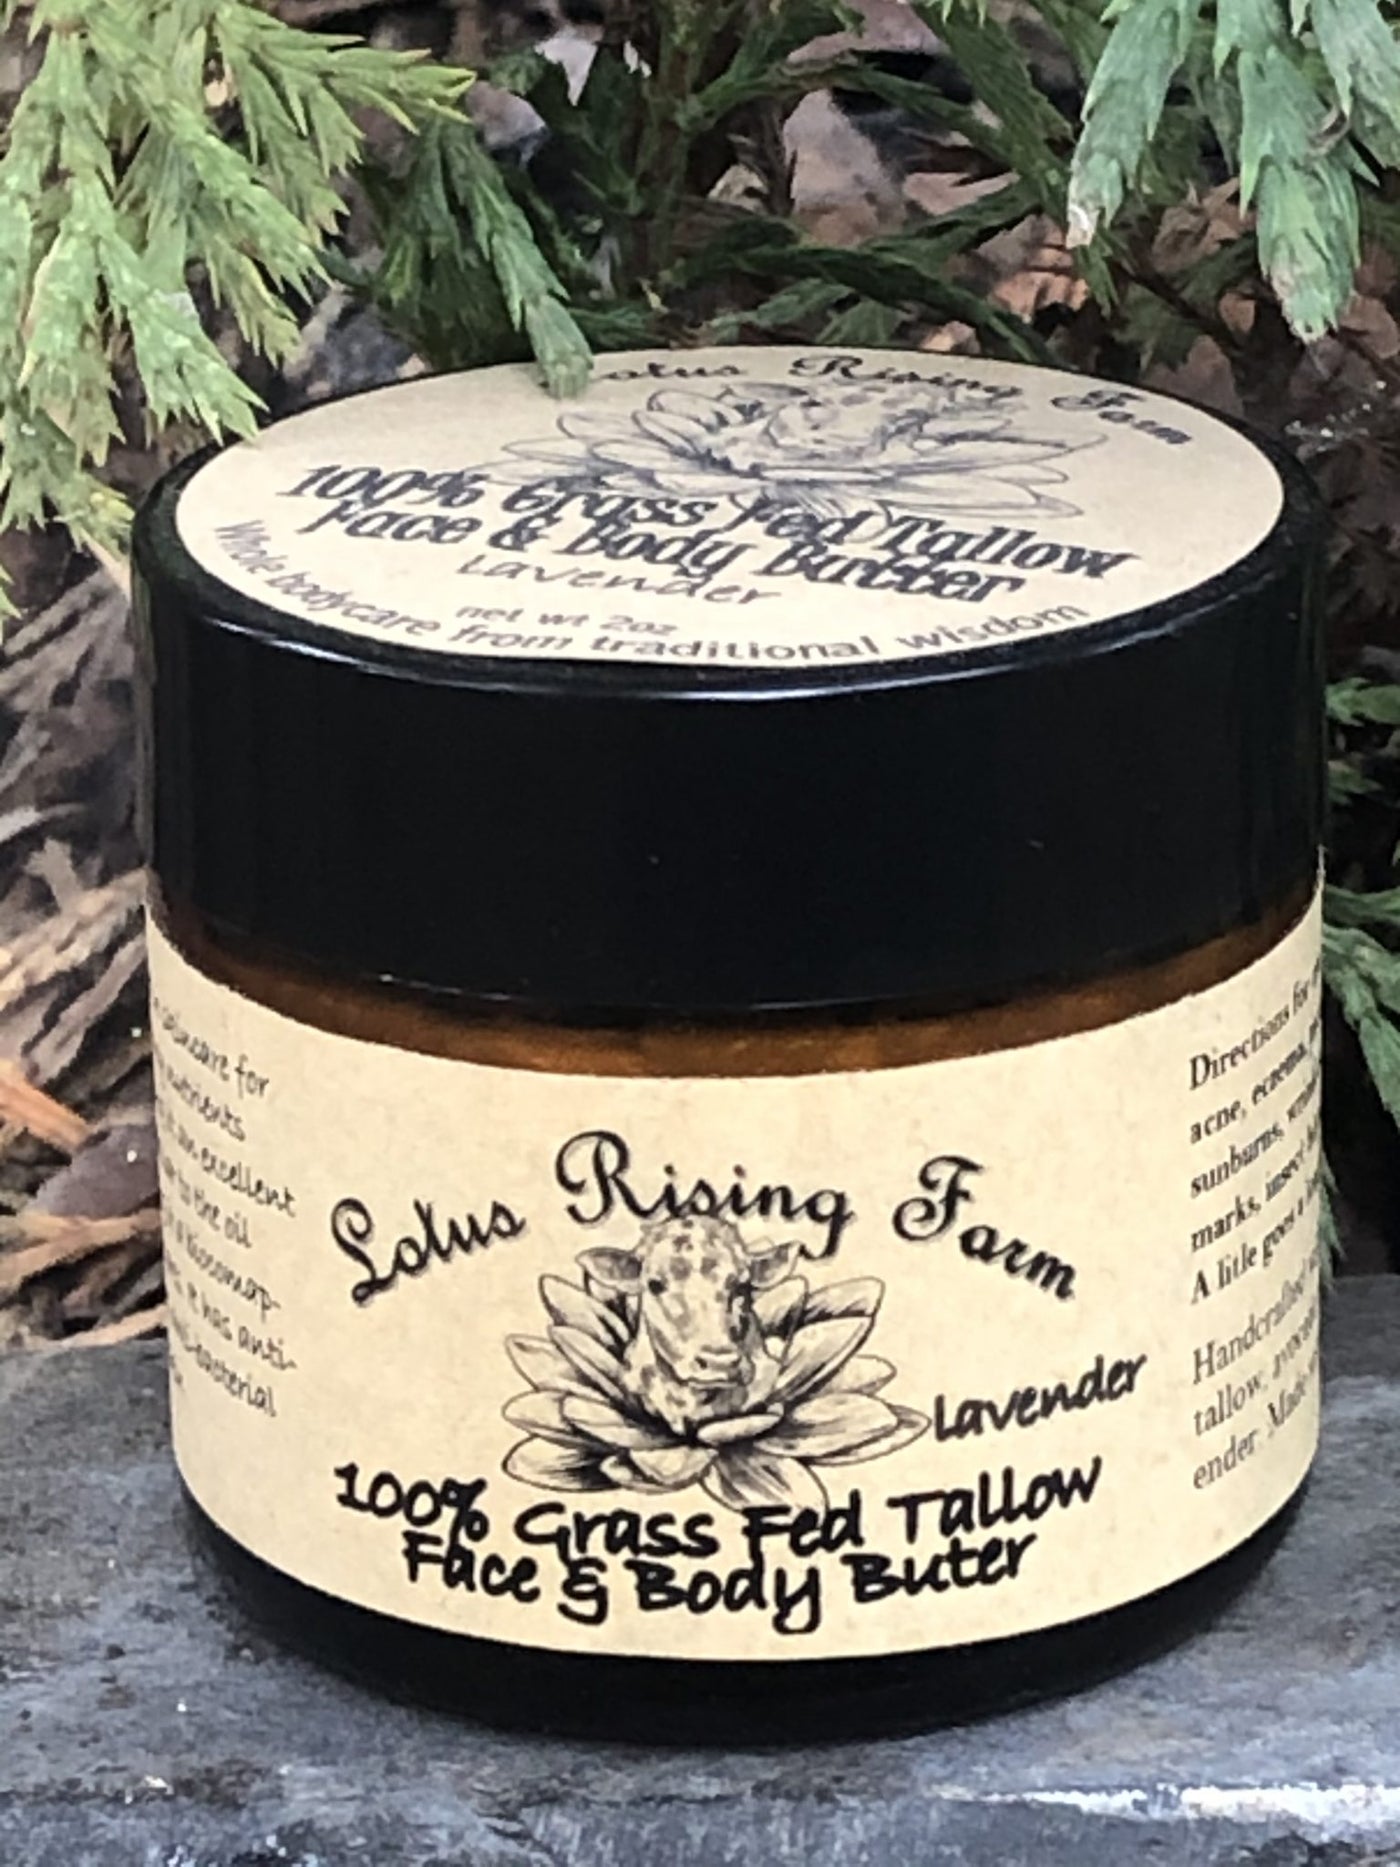 Lotus Rising Farm - 4 ozFace and Body Butter